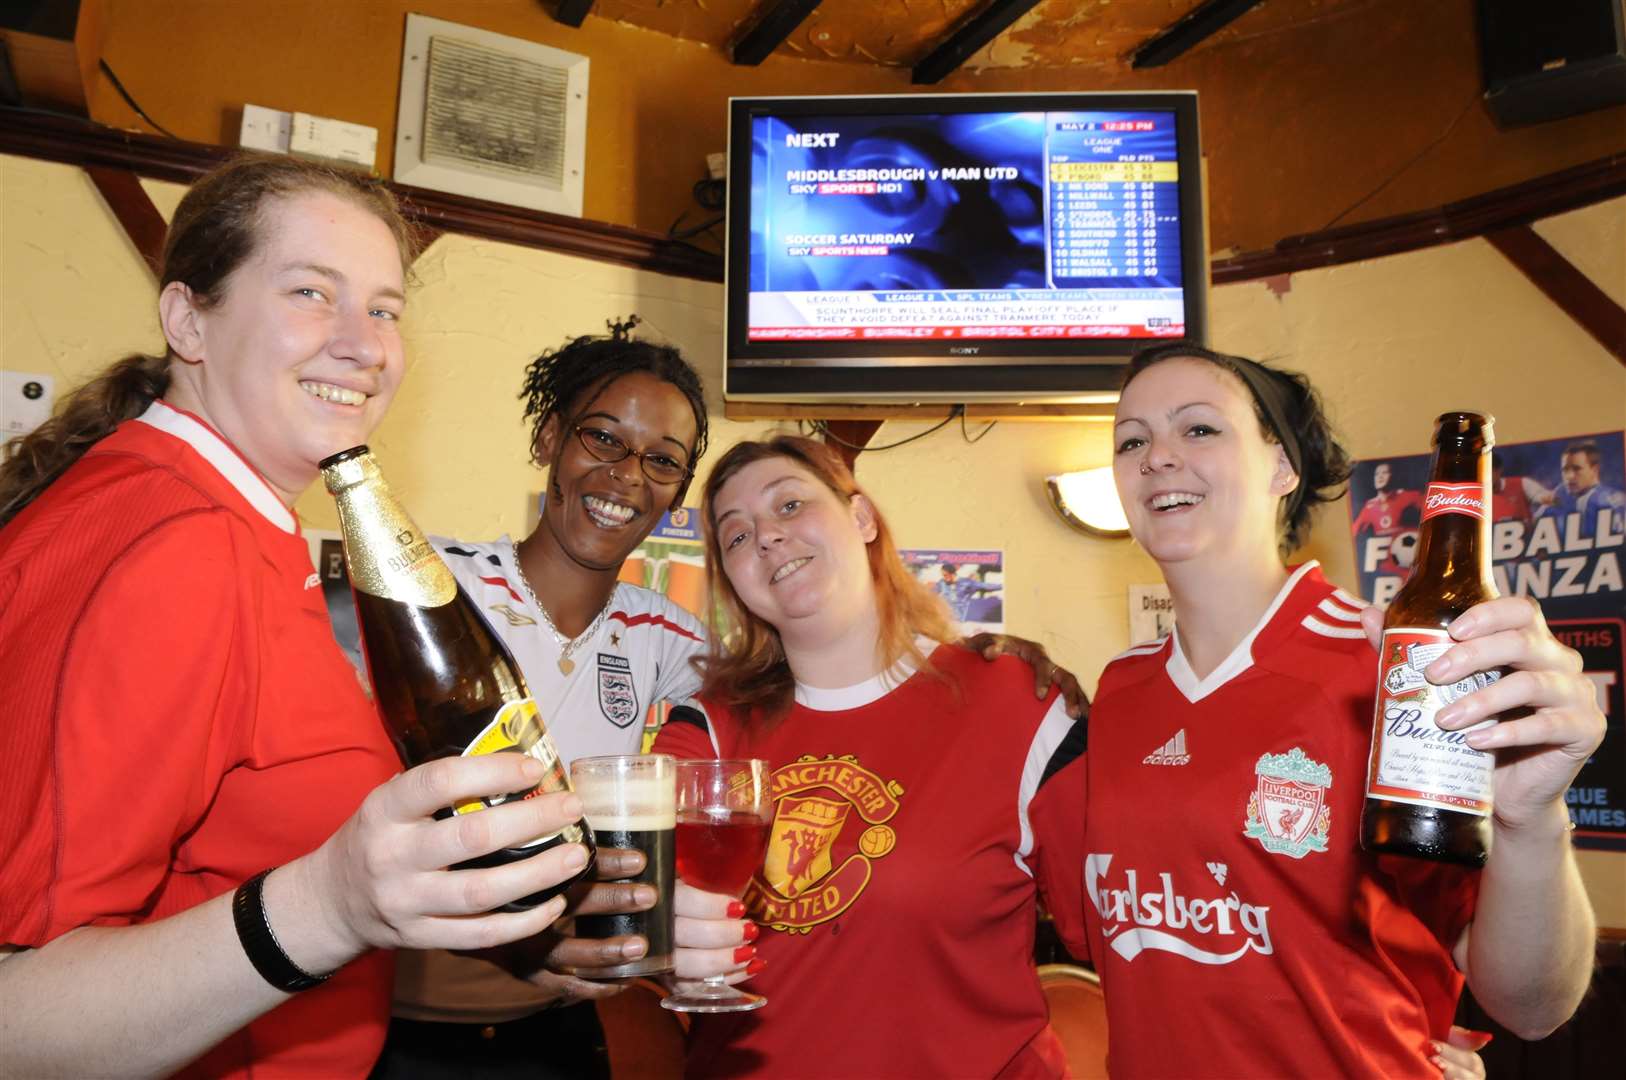 A new promotion to attract more women to watch football at the Red Lion in King Street in May 2009 - if they wore a football shirt, they got a free drink. The pub, which dates back to 1650, is still going today